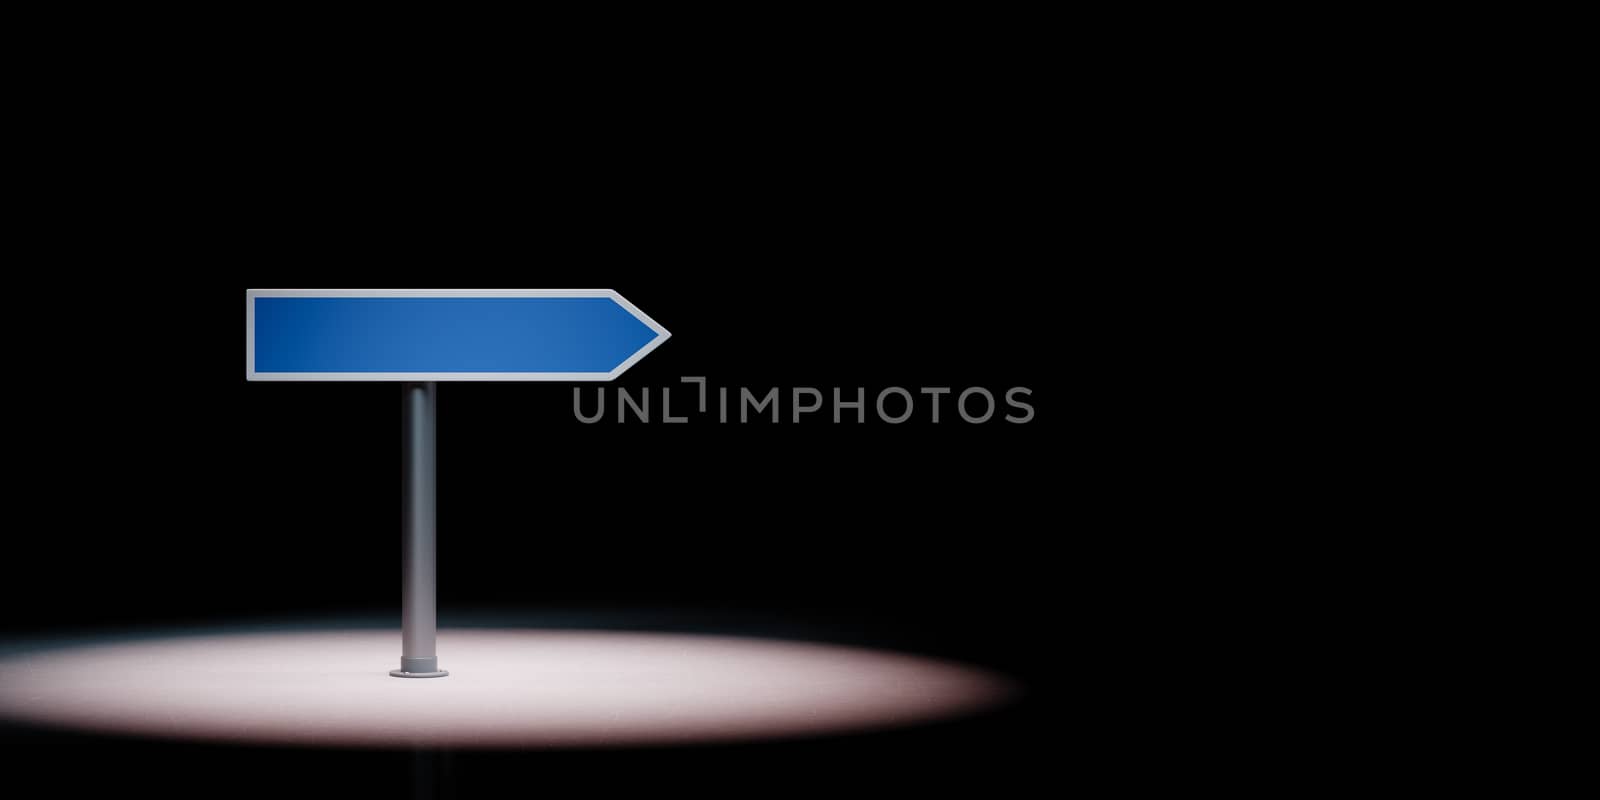 Directional Arrow Road Sign Spotlighted on Black Background by make